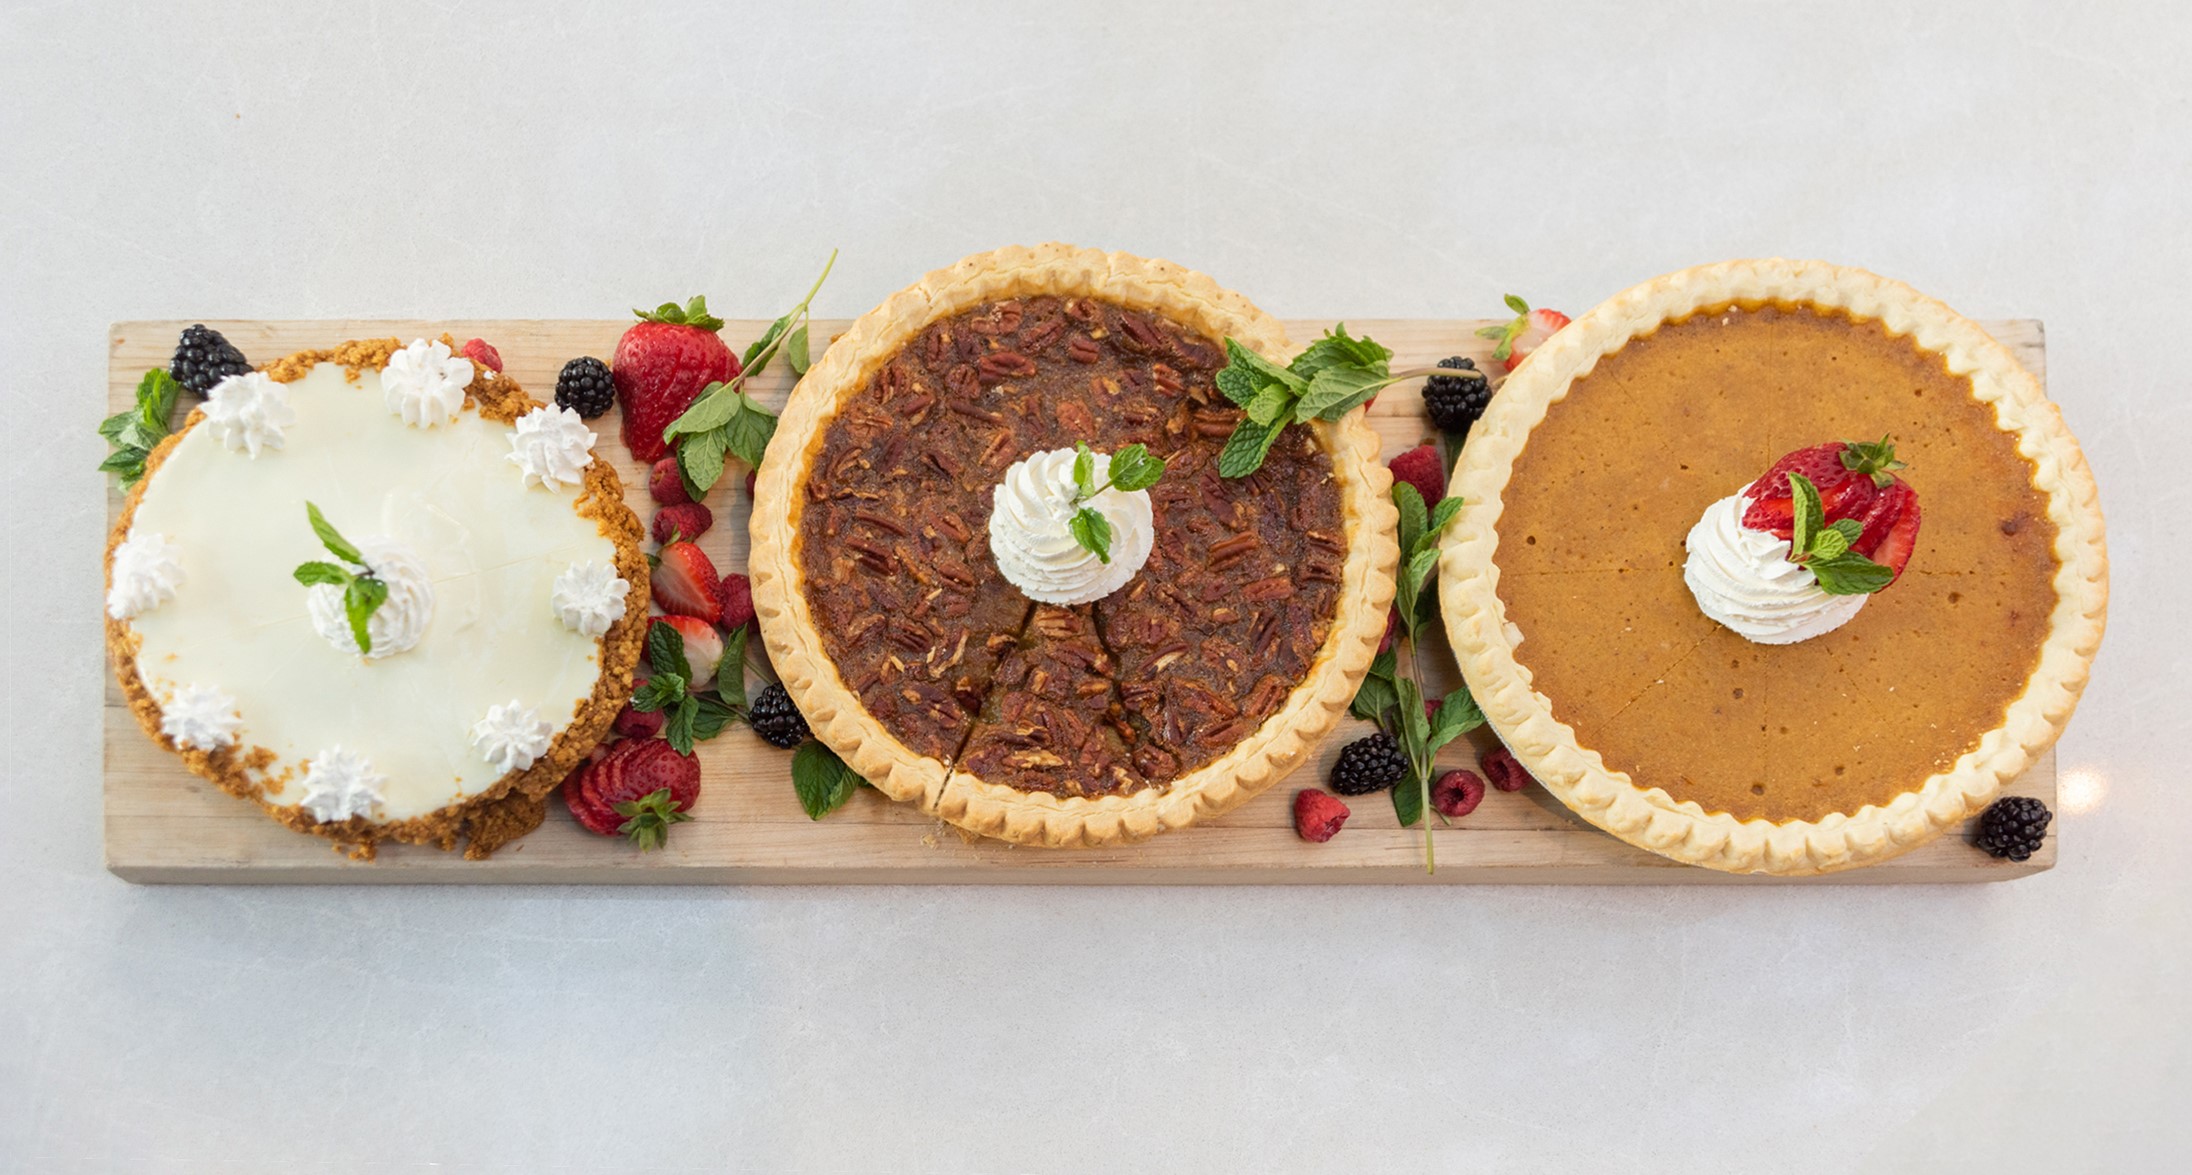 The holidays are here and we have 3 delicious pies from our Executive Sous Chef for you to share with friends and family!